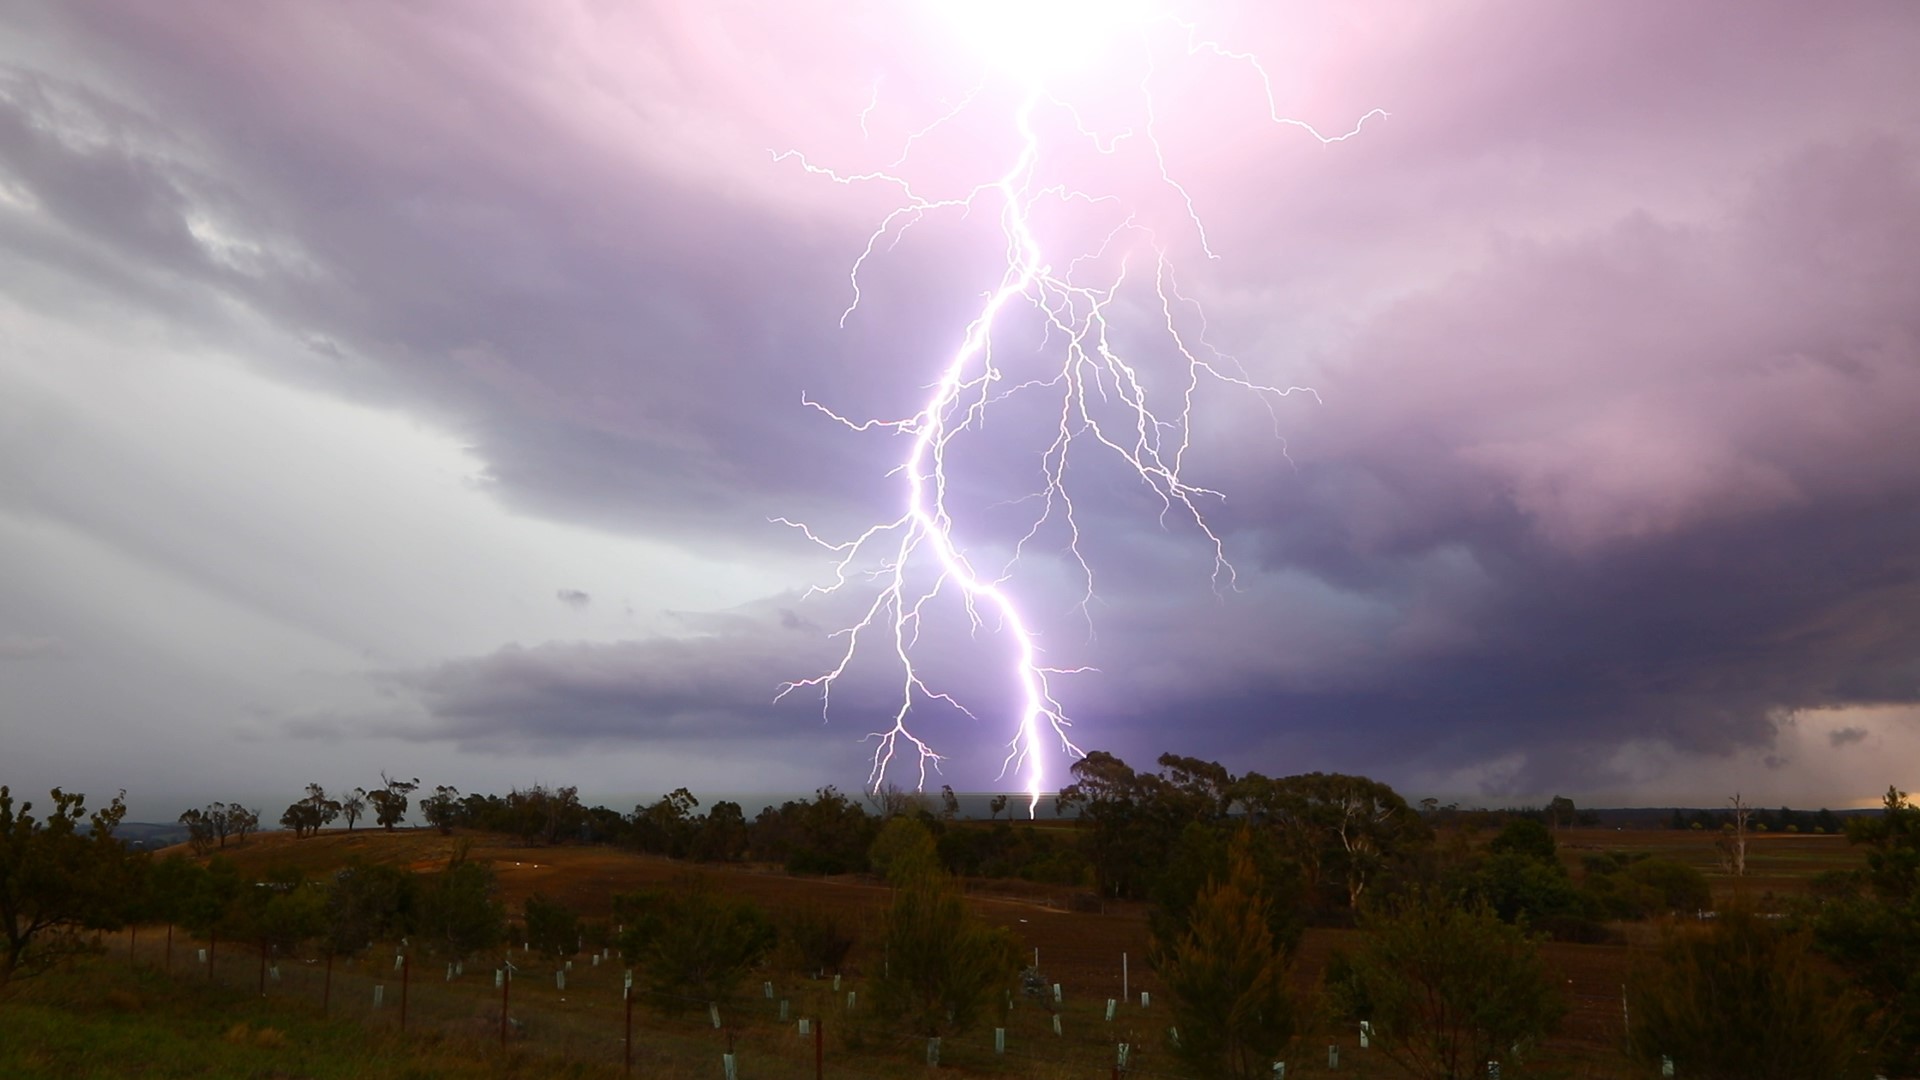 Insane lightning barrage  gees 2 years ago

Southern Tablelands near Moss Vale today! Just briefly an insane show! The best structure and lightning fo...